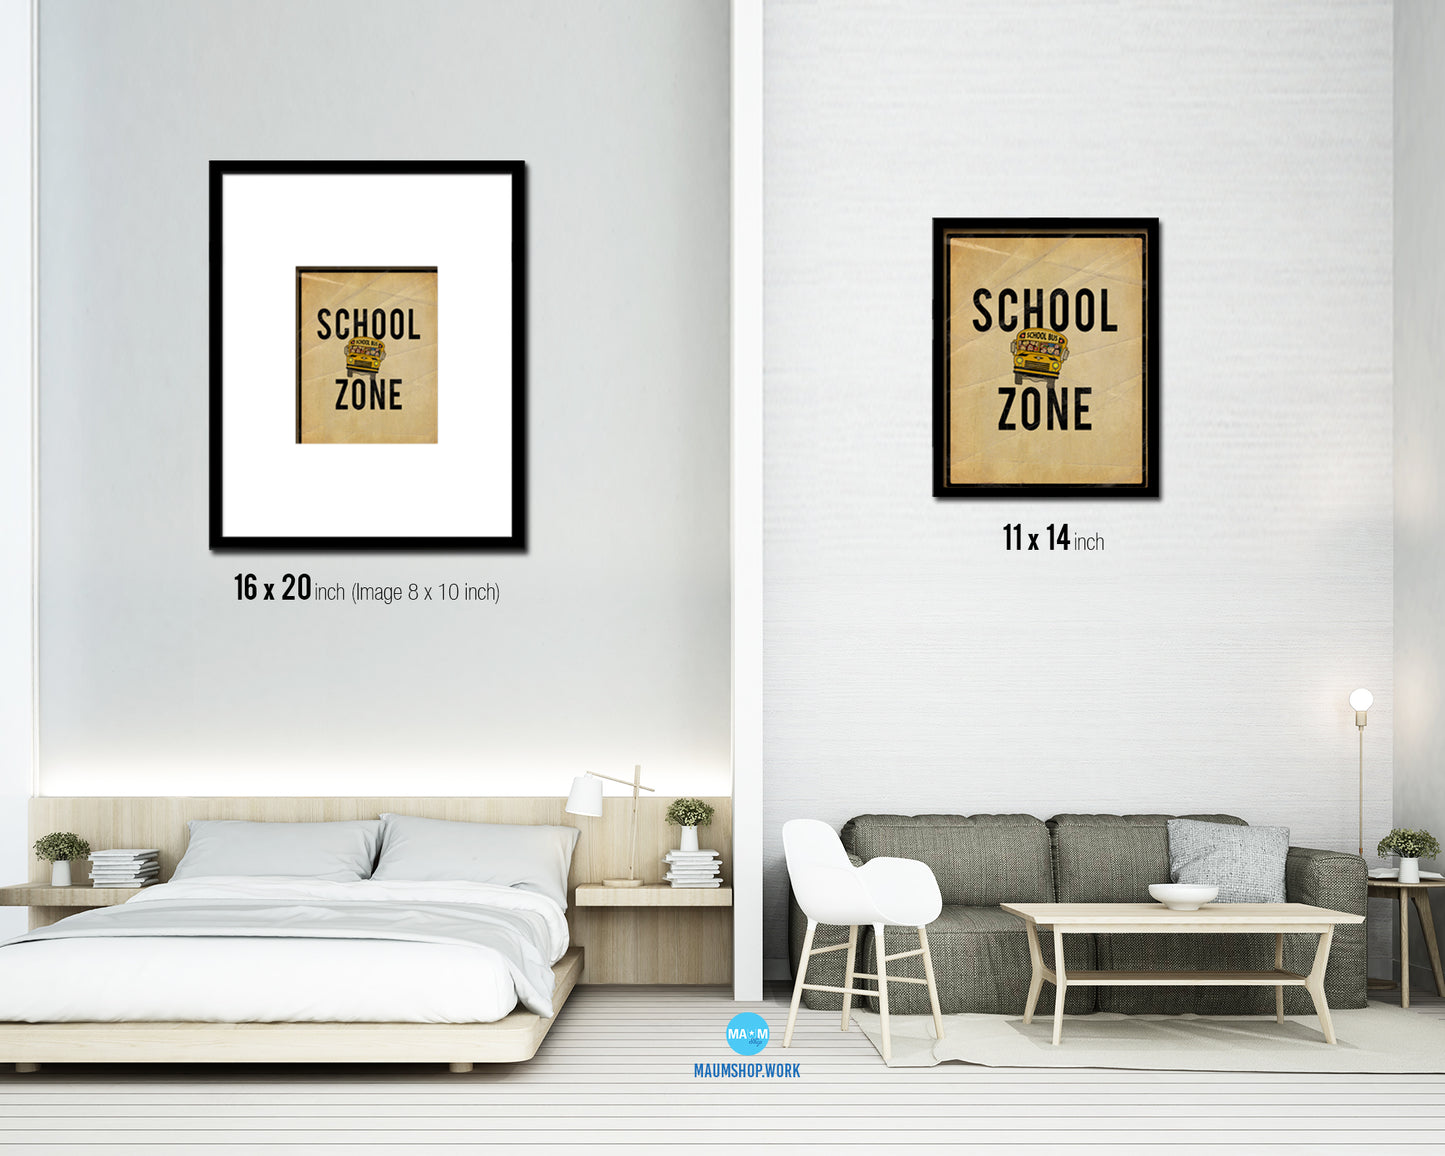 School Zone Notice Danger Sign Framed Print Home Decor Wall Art Gifts